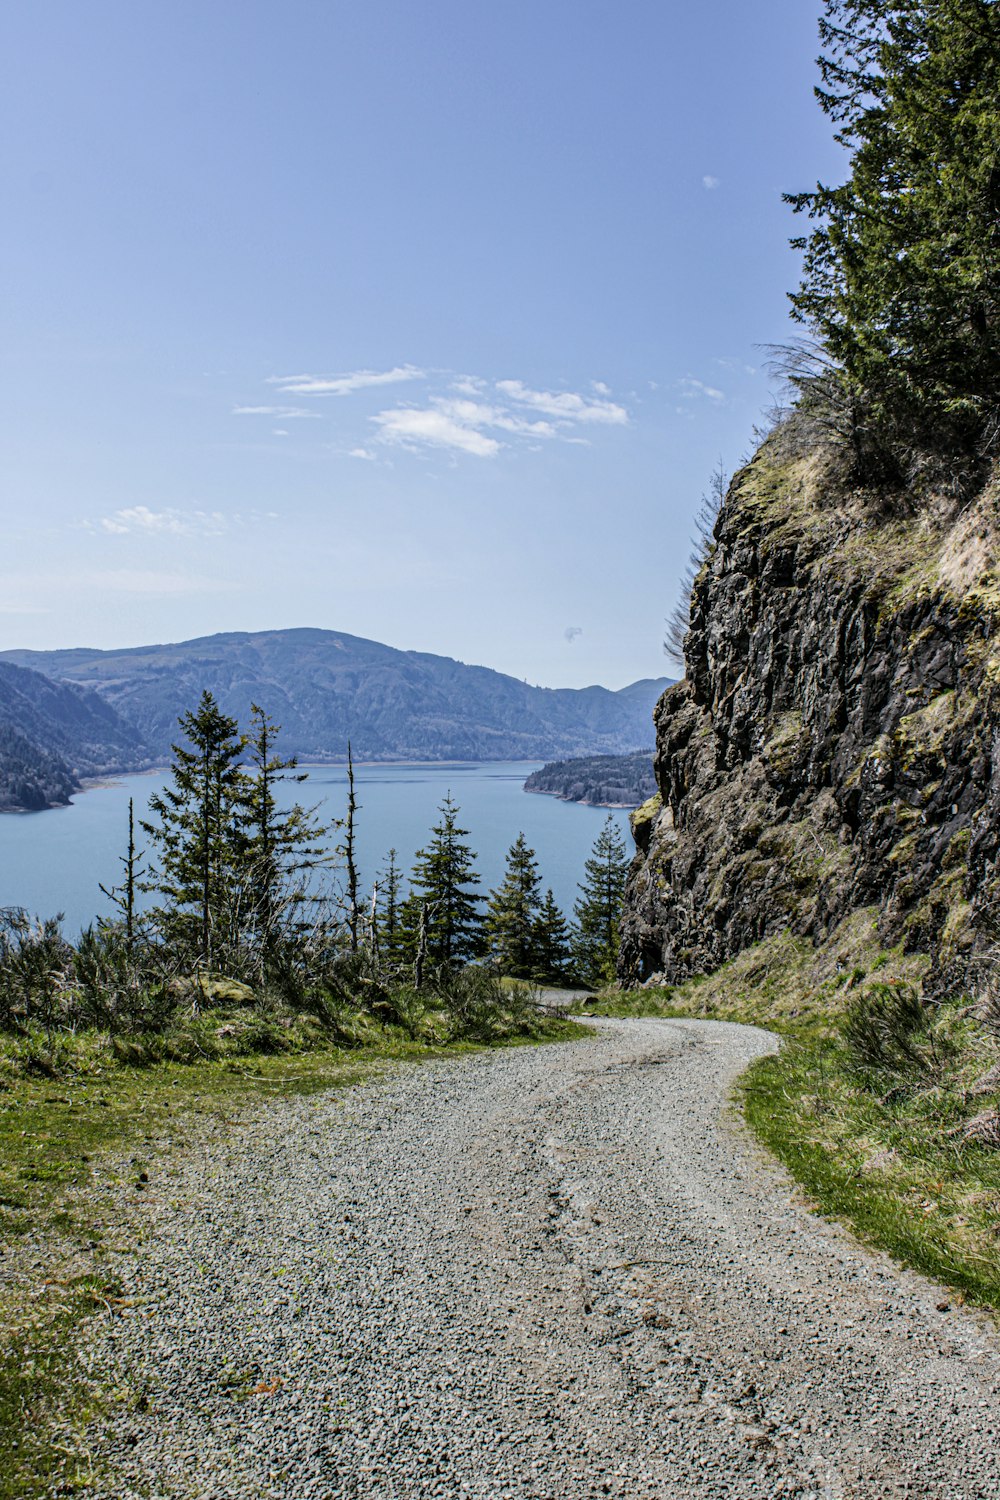 a gravel road going up a hill with a lake in the distance